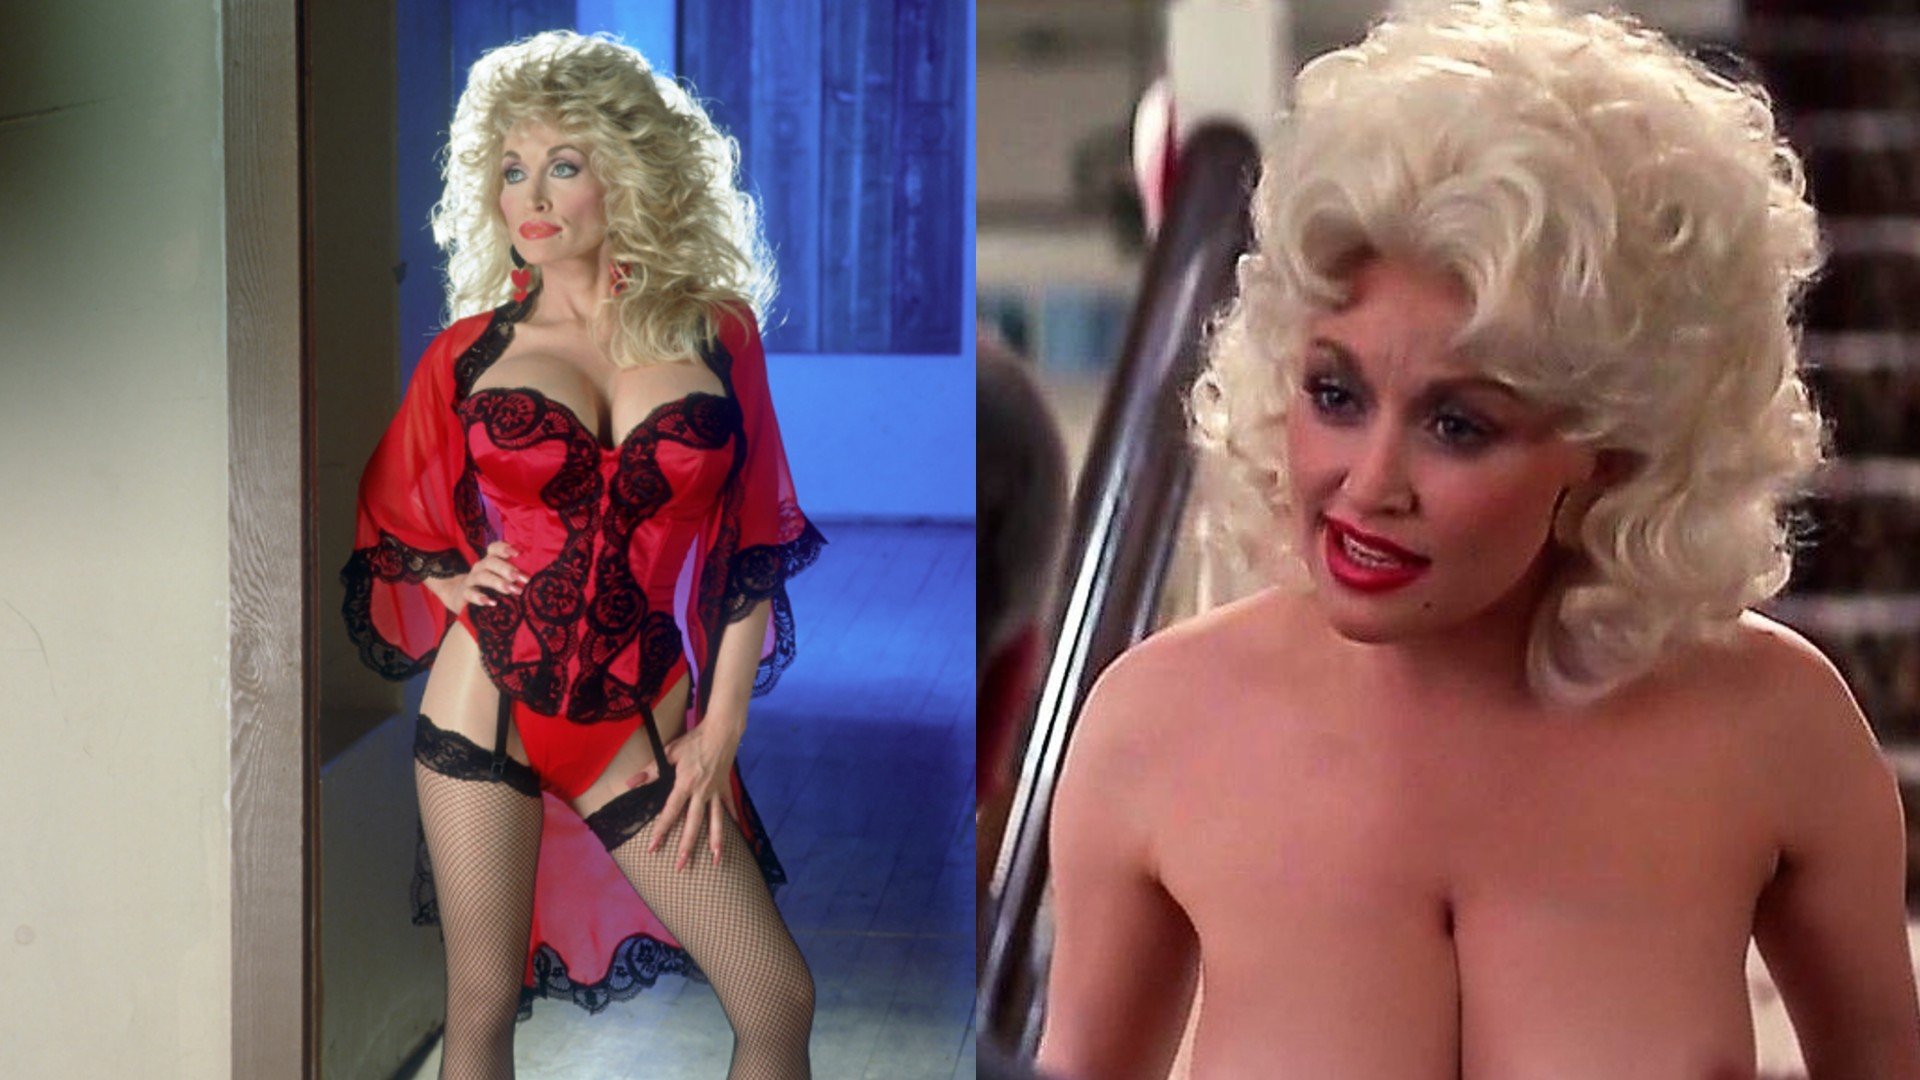 Dolly Parton Nudes, pictures and naked videos of her boobs & ass and ot...